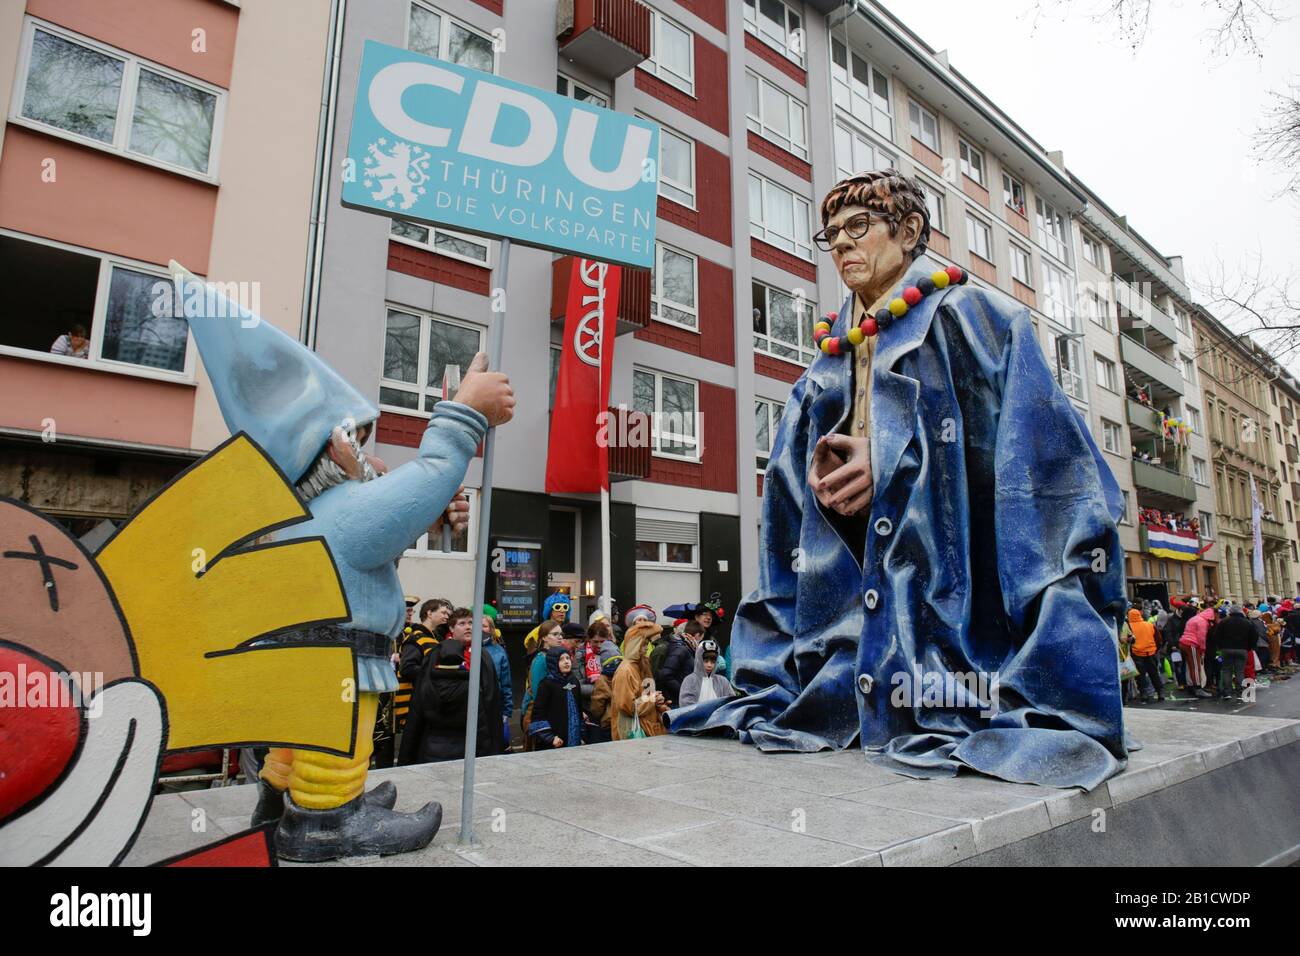 Mainz, Germany. 24th February 2020. The chairwoman of the Christian Democratic Union (CDU) and German Minister of Defence Annegret Kramp-Karrenbauer is depicted on a float in the Mainz Rose Monday parade. She wears an oversized dress of German Chancellor Angela Merkel and dwarf with a STOP sign and a sign reading ‘CDU Thuringia' in front of her, lauding to her not being able to fill Angela Merkel's shoes, especially after the recent scandal after the Thuringia election. Around half a million people lined the streets of Mainz for the traditional Rose Monday Carnival Parade. The 9 km long parade Stock Photo